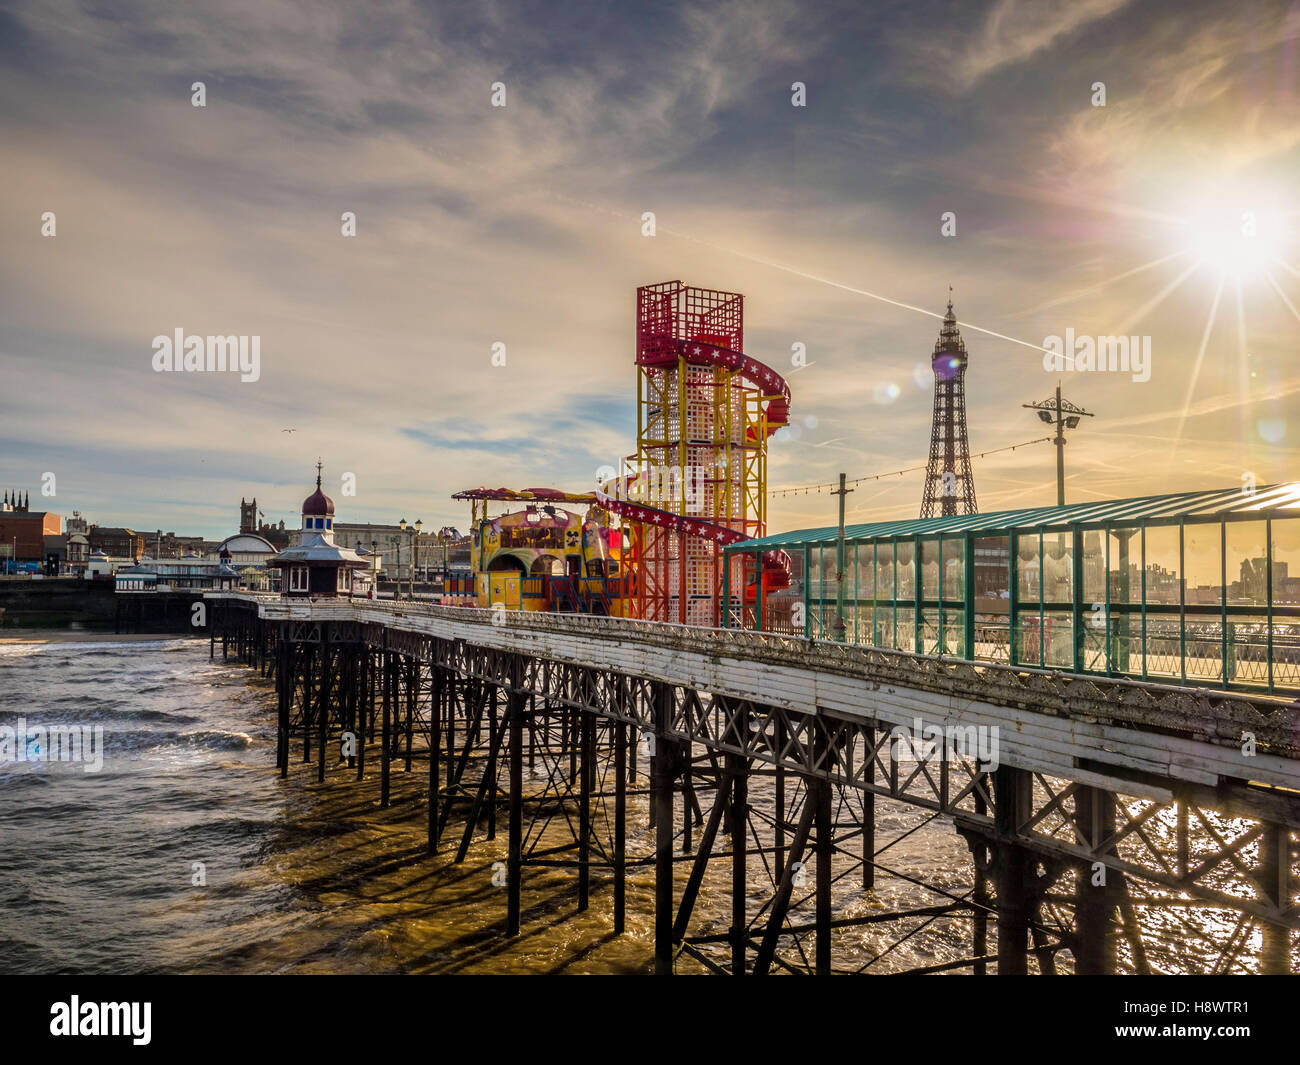 Helter Skelter on North Pier with Tower in distance, Blackpool, Lancashire, UK. Stock Photo